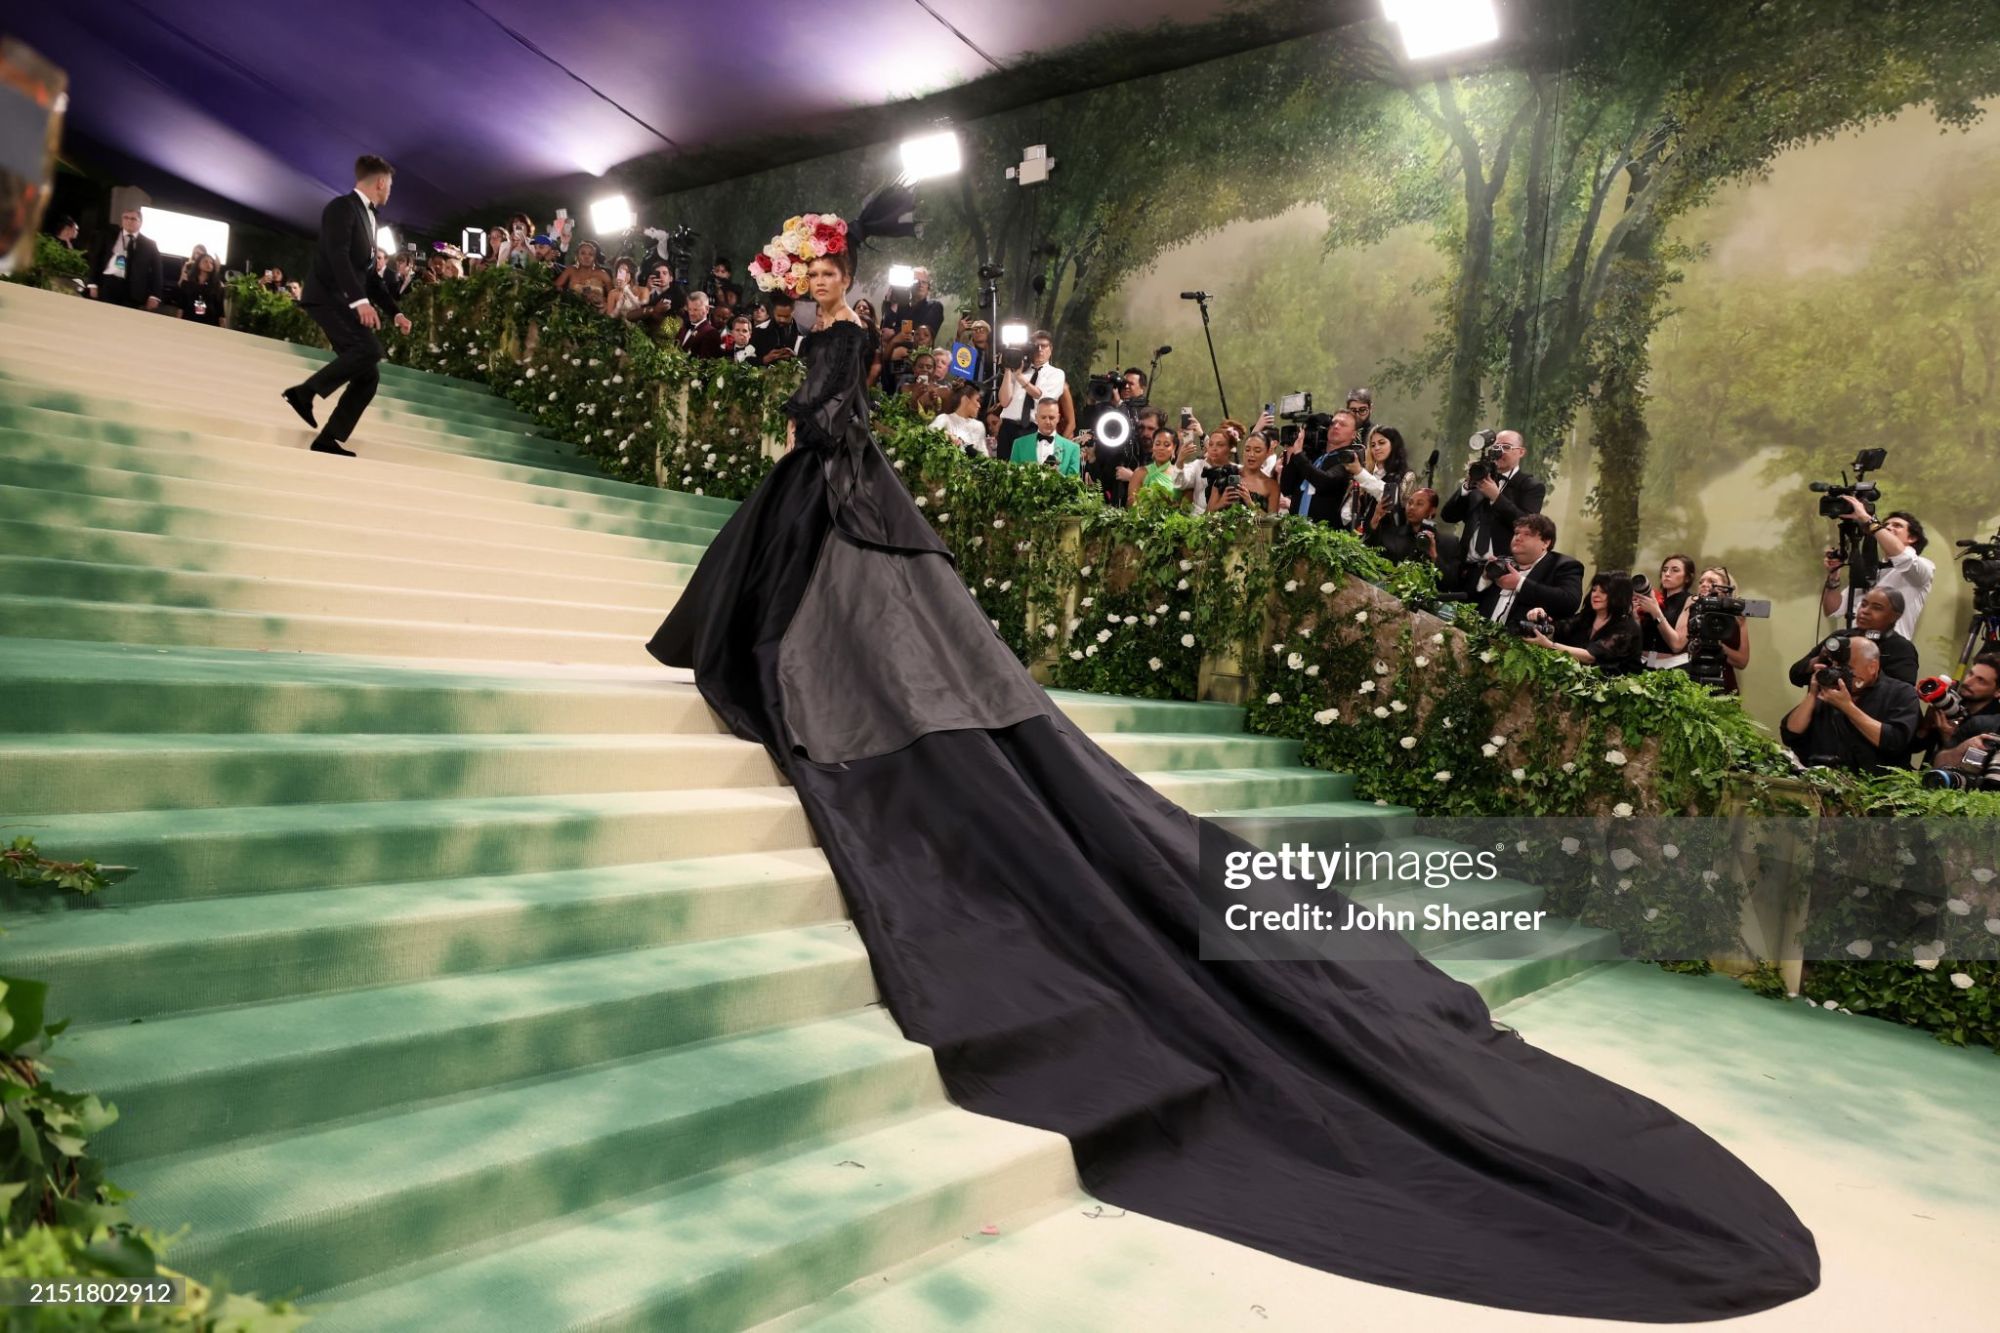 gettyimages-2151802912-2048x2048.jpg